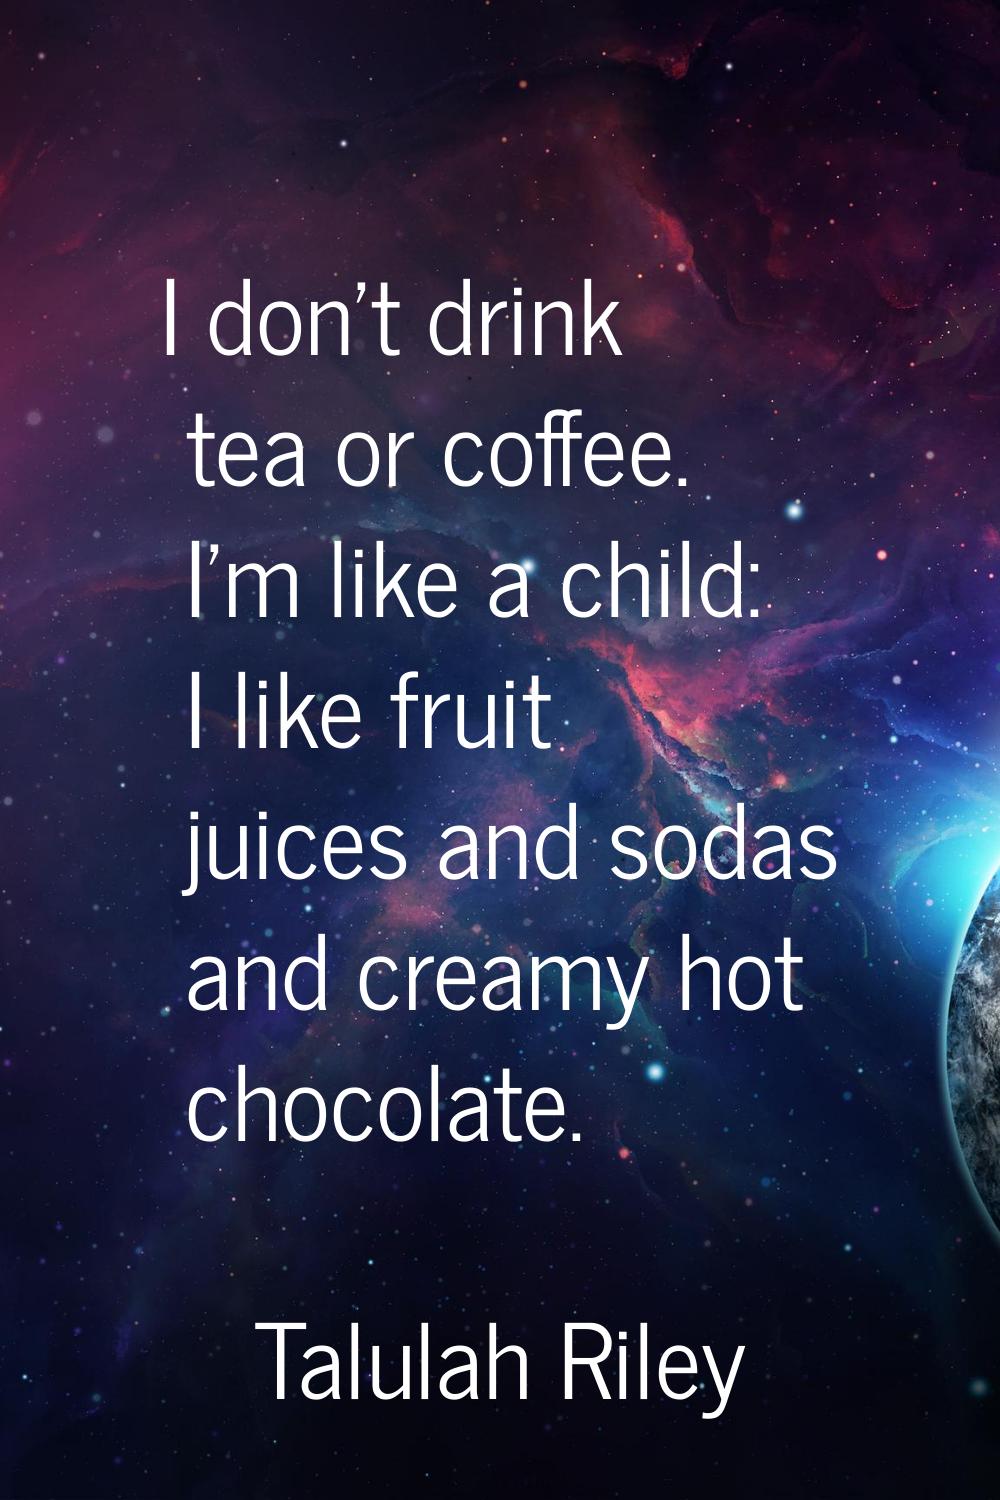 I don't drink tea or coffee. I'm like a child: I like fruit juices and sodas and creamy hot chocola